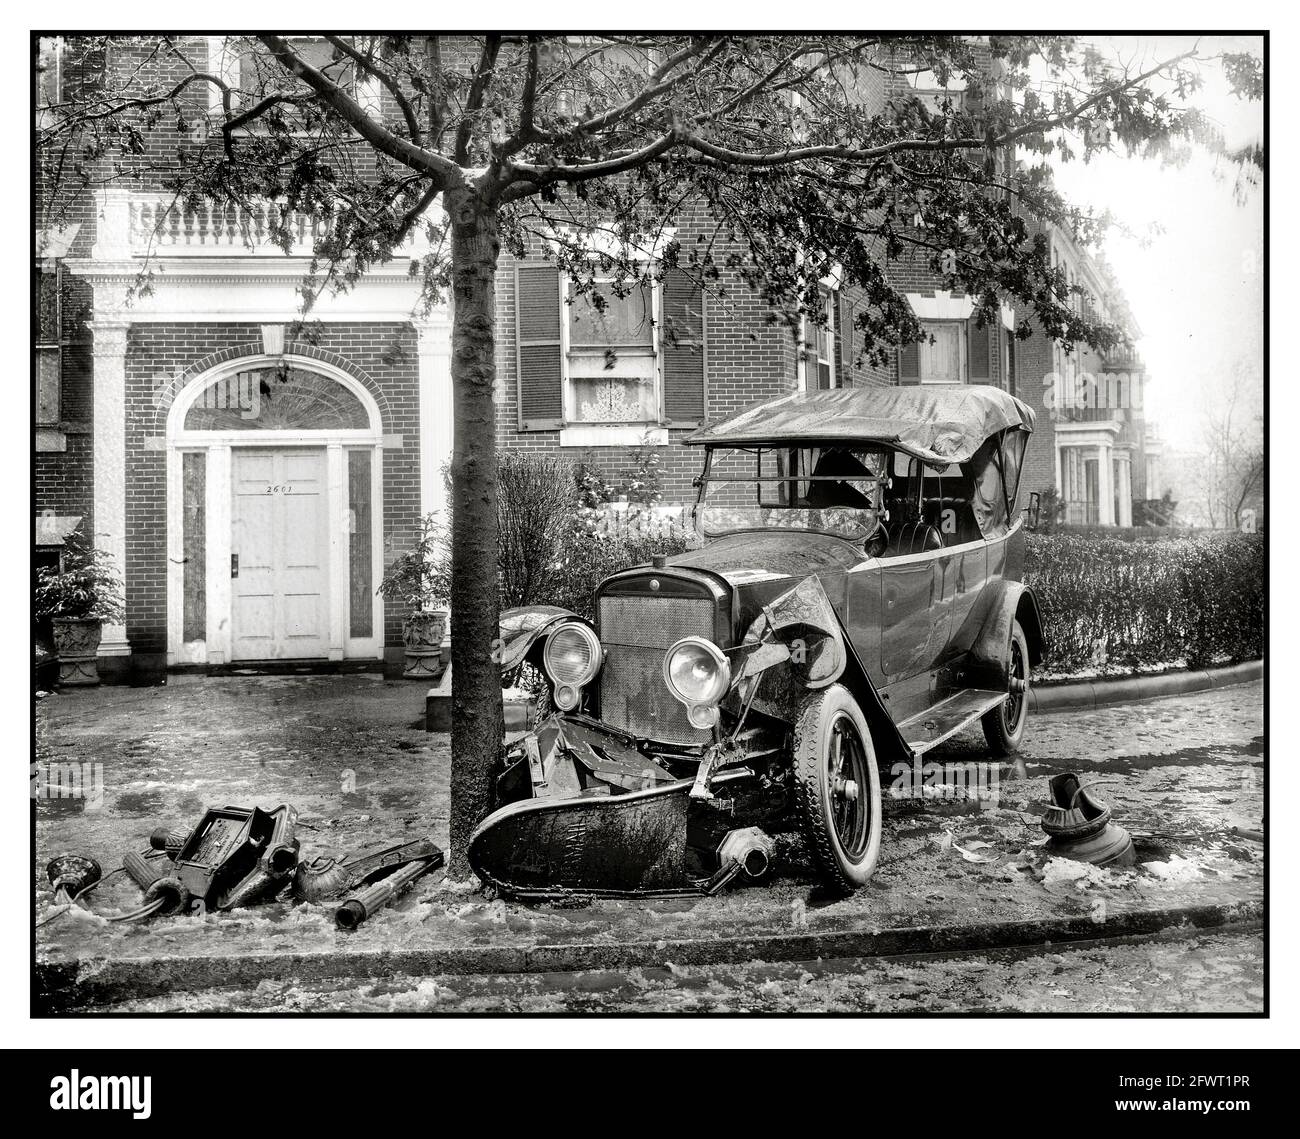 1900's  Vintage historic Car accident crash into a tree and fire hydrant with frozen water and ice on the sidewalk pavement B&W image Stock Photo